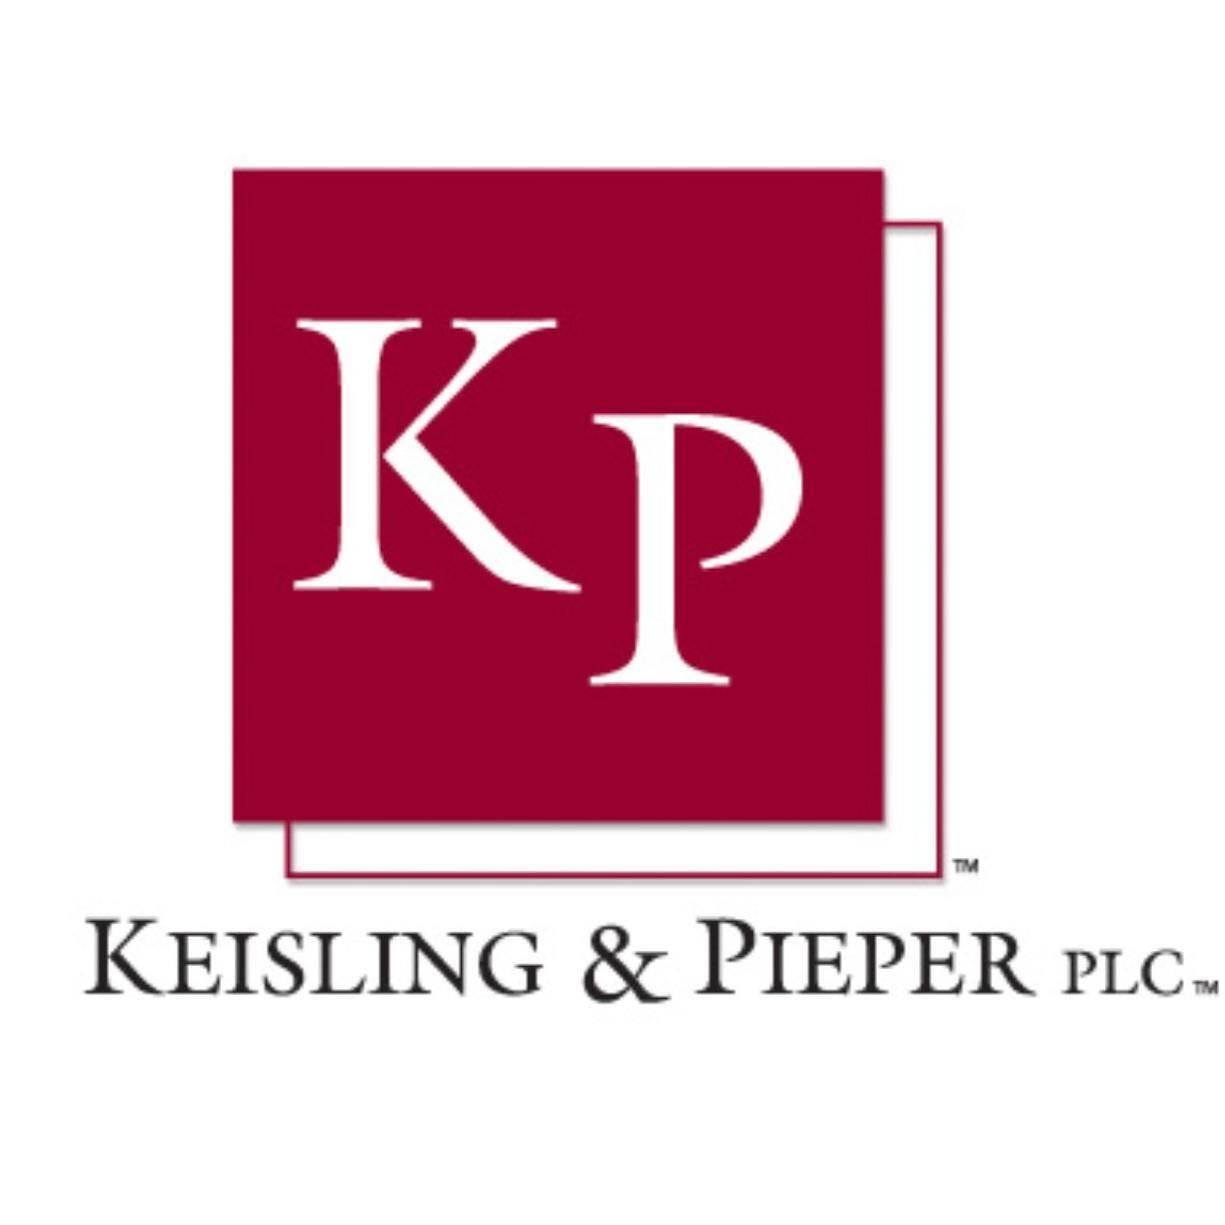 Keisling & Pieper PLC is an intellectual property law firm that focuses on all facets of intellectual property protection.